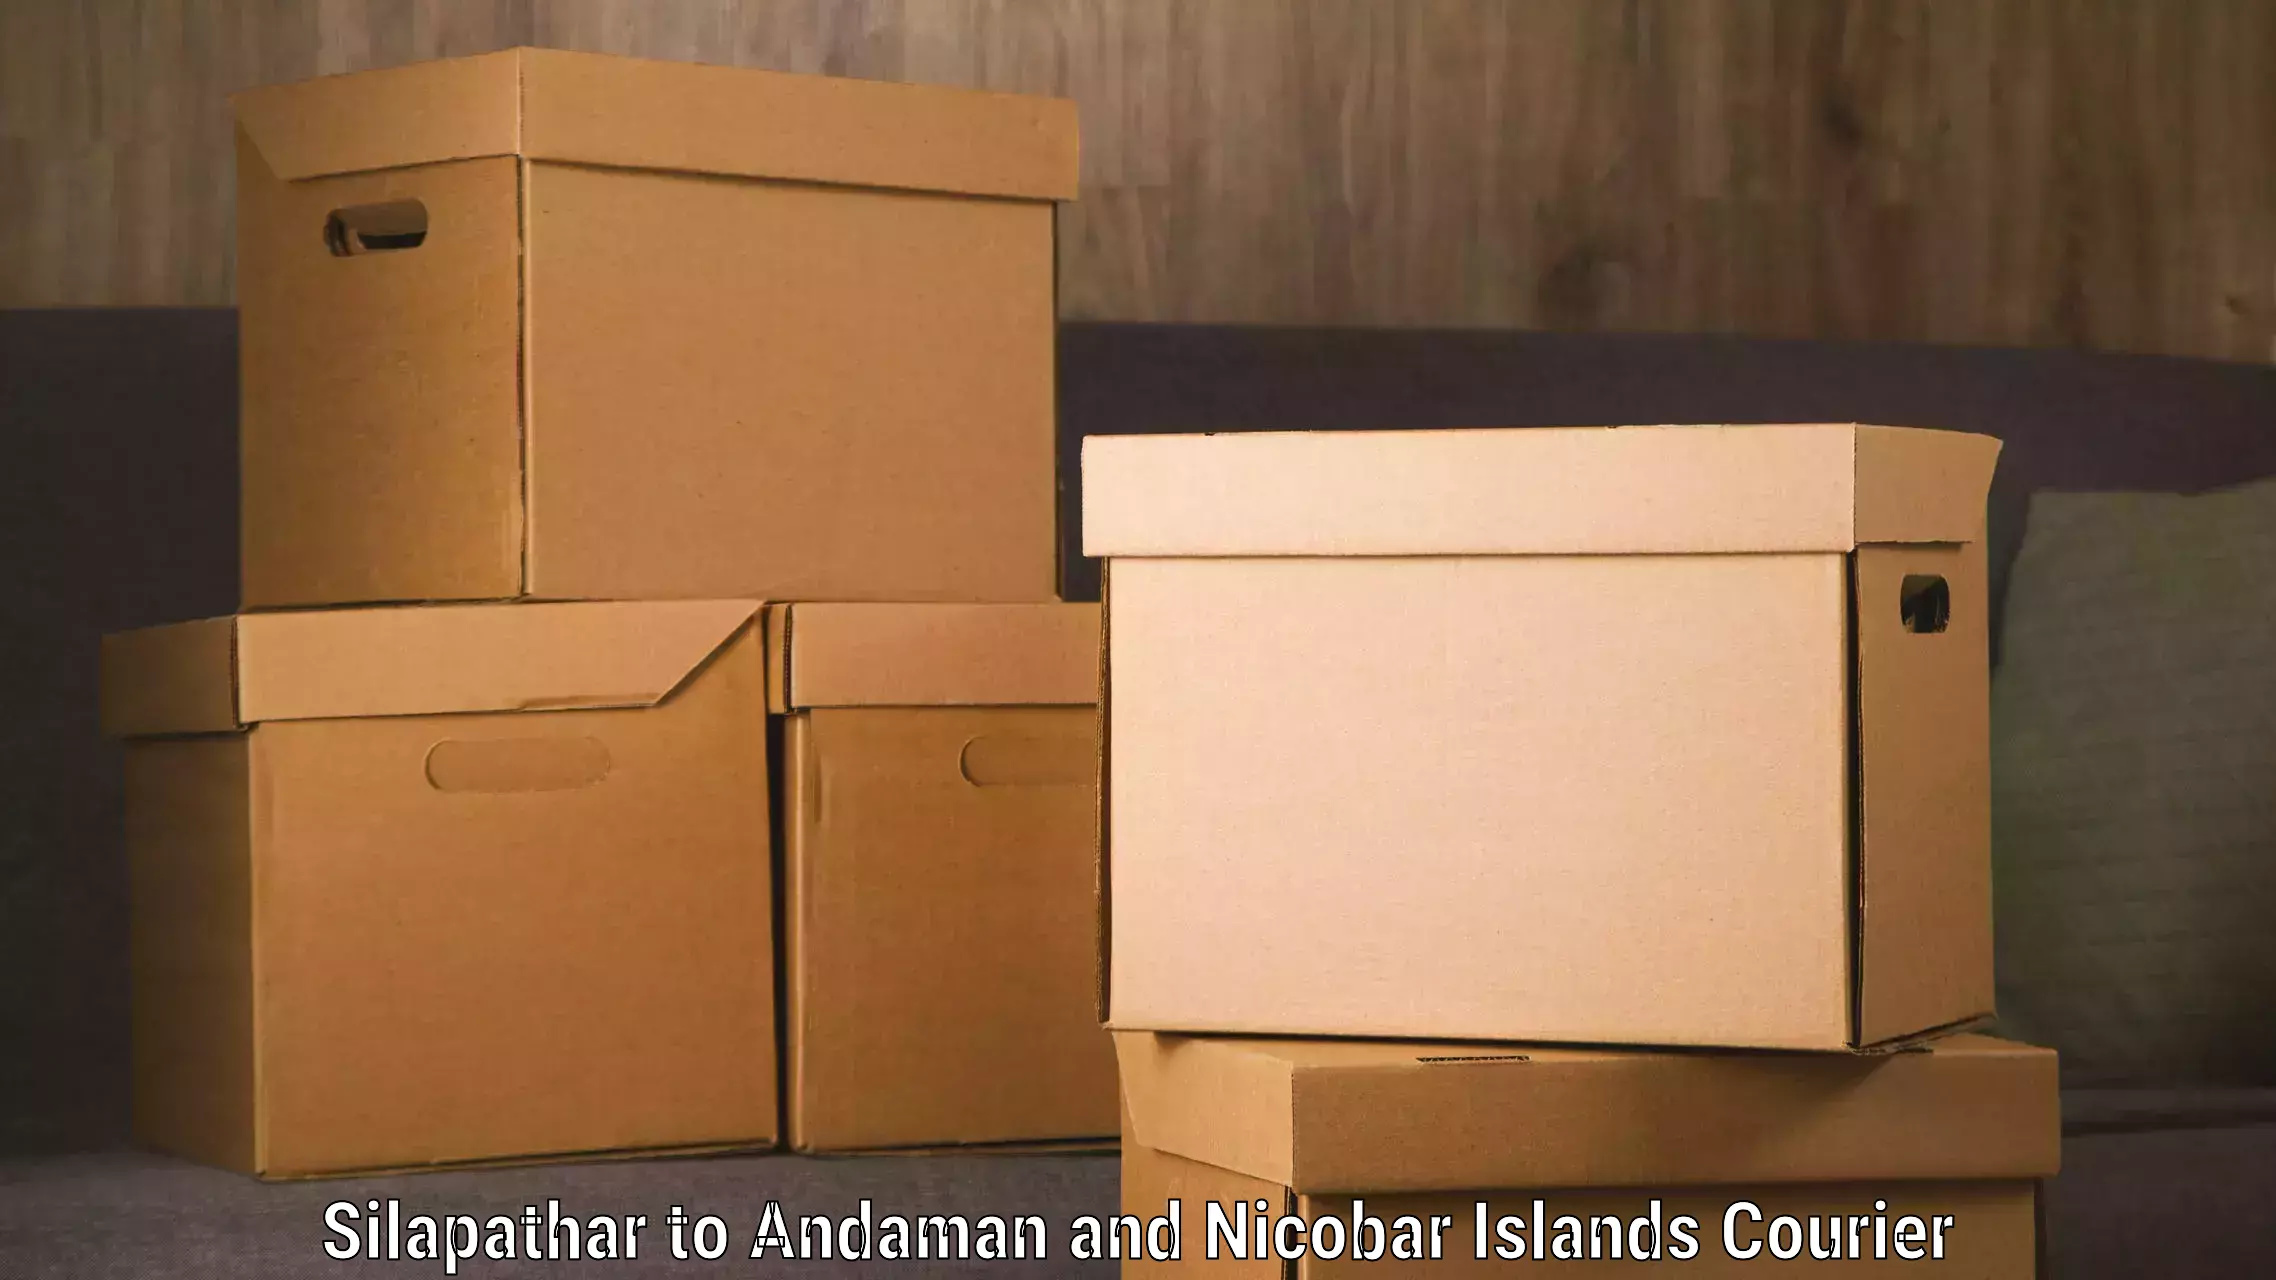 Luggage shipment specialists Silapathar to Nicobar